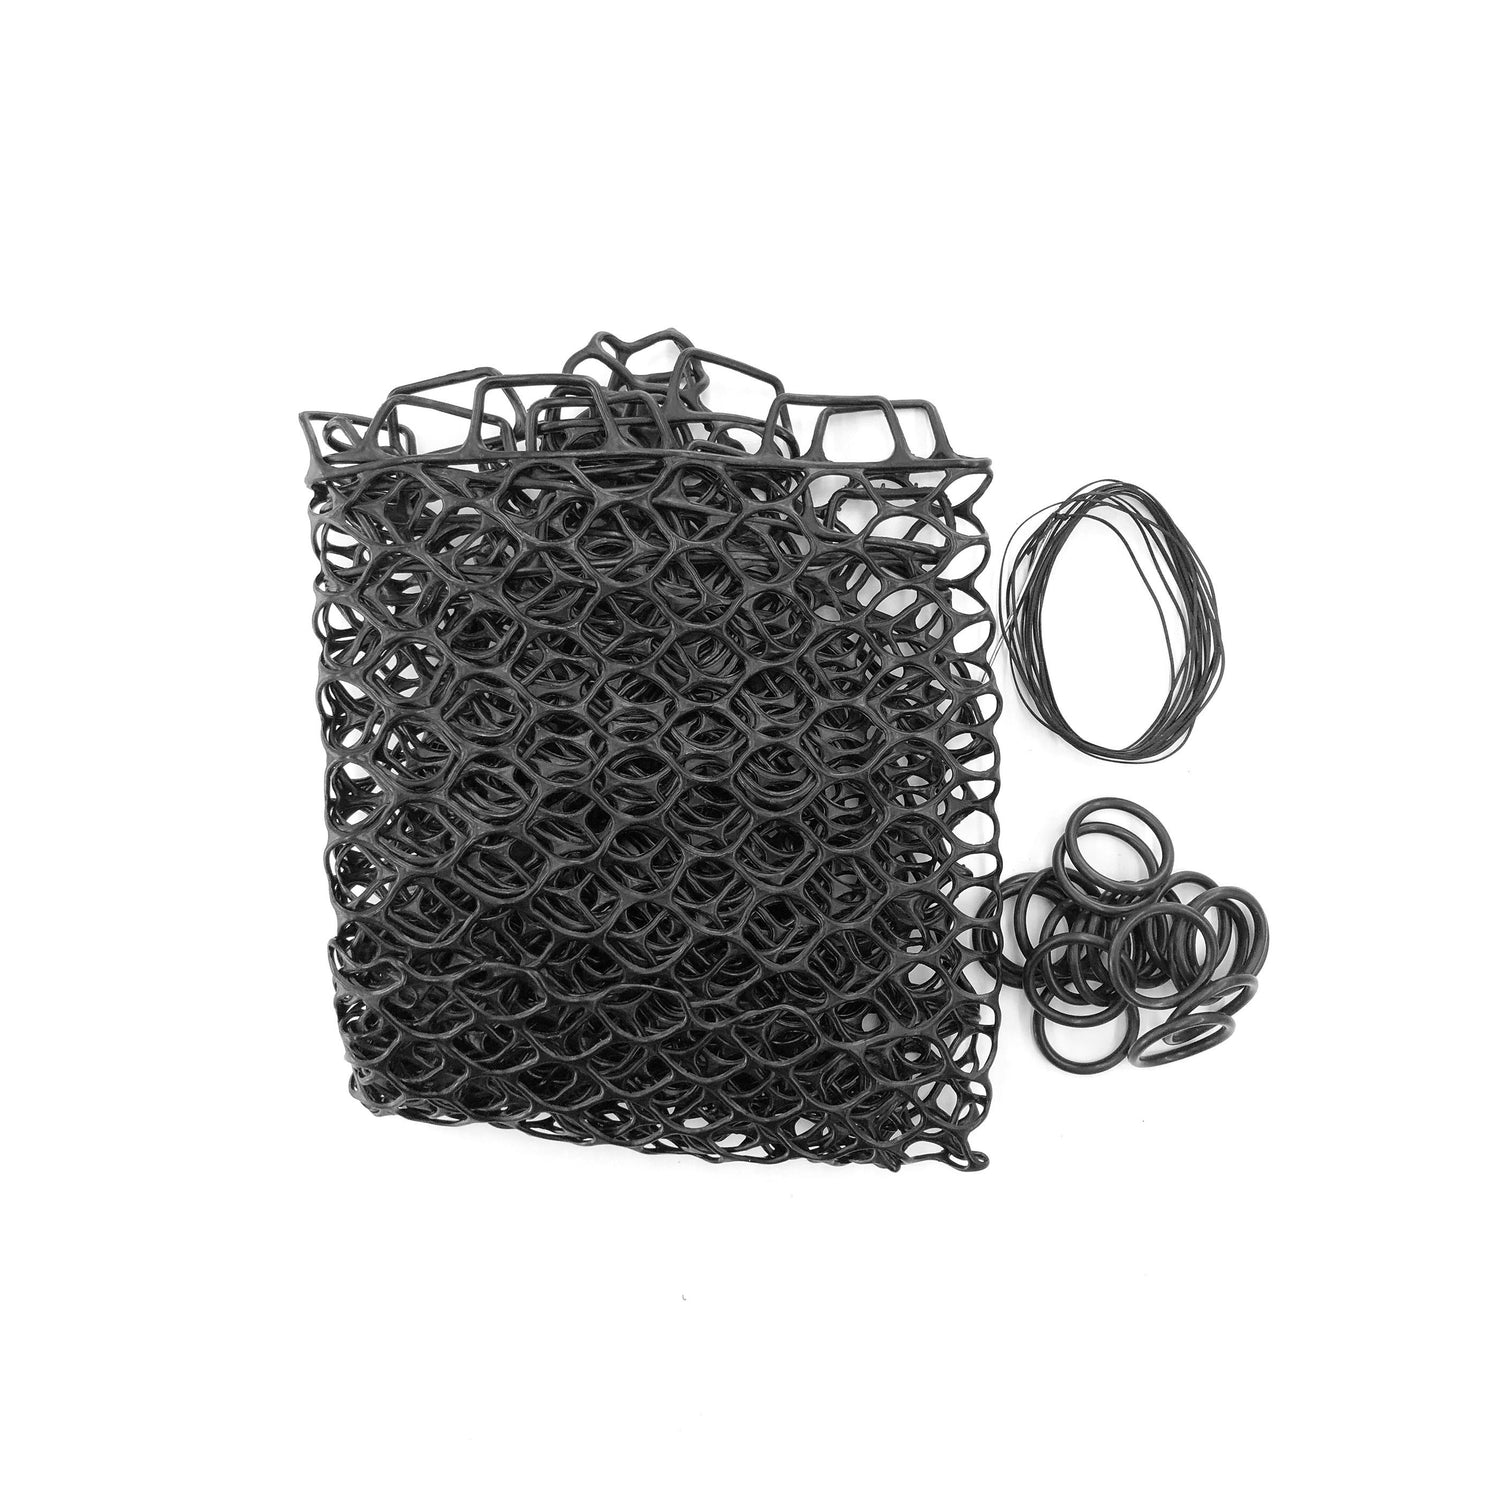 Fishpond Nomad Replacement Rubber Net - Black - 19 in